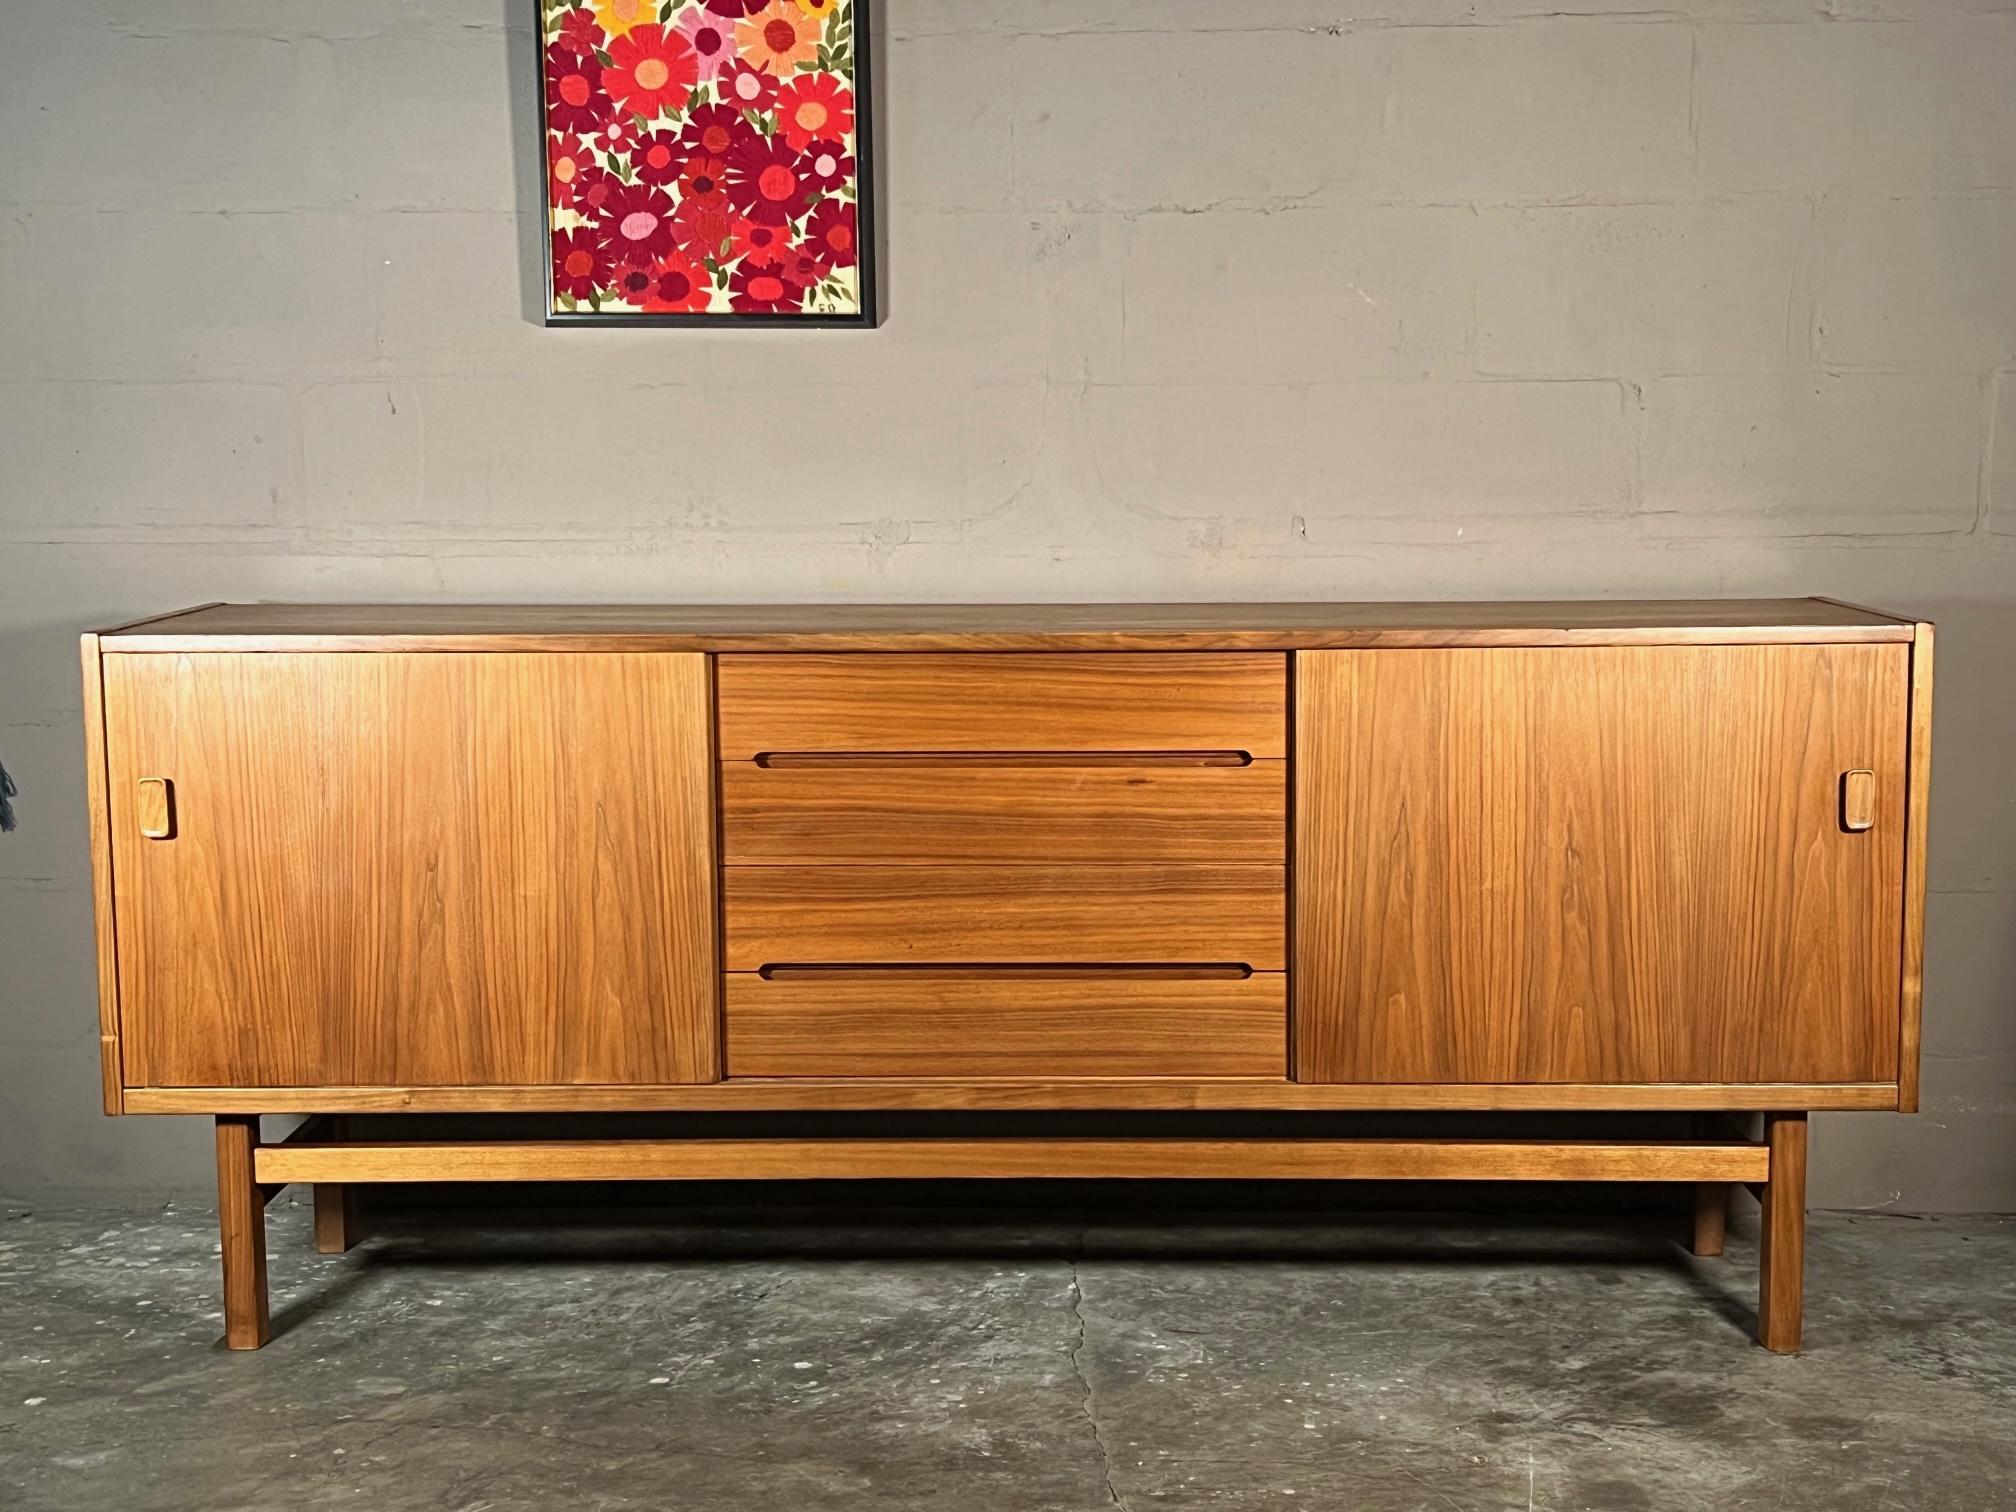 A Classic 1960's teak credenza by Nils Jonsson for Troeds Bjarnum, Sweden. Purchased from original owners, in very good condition, with nice patina.